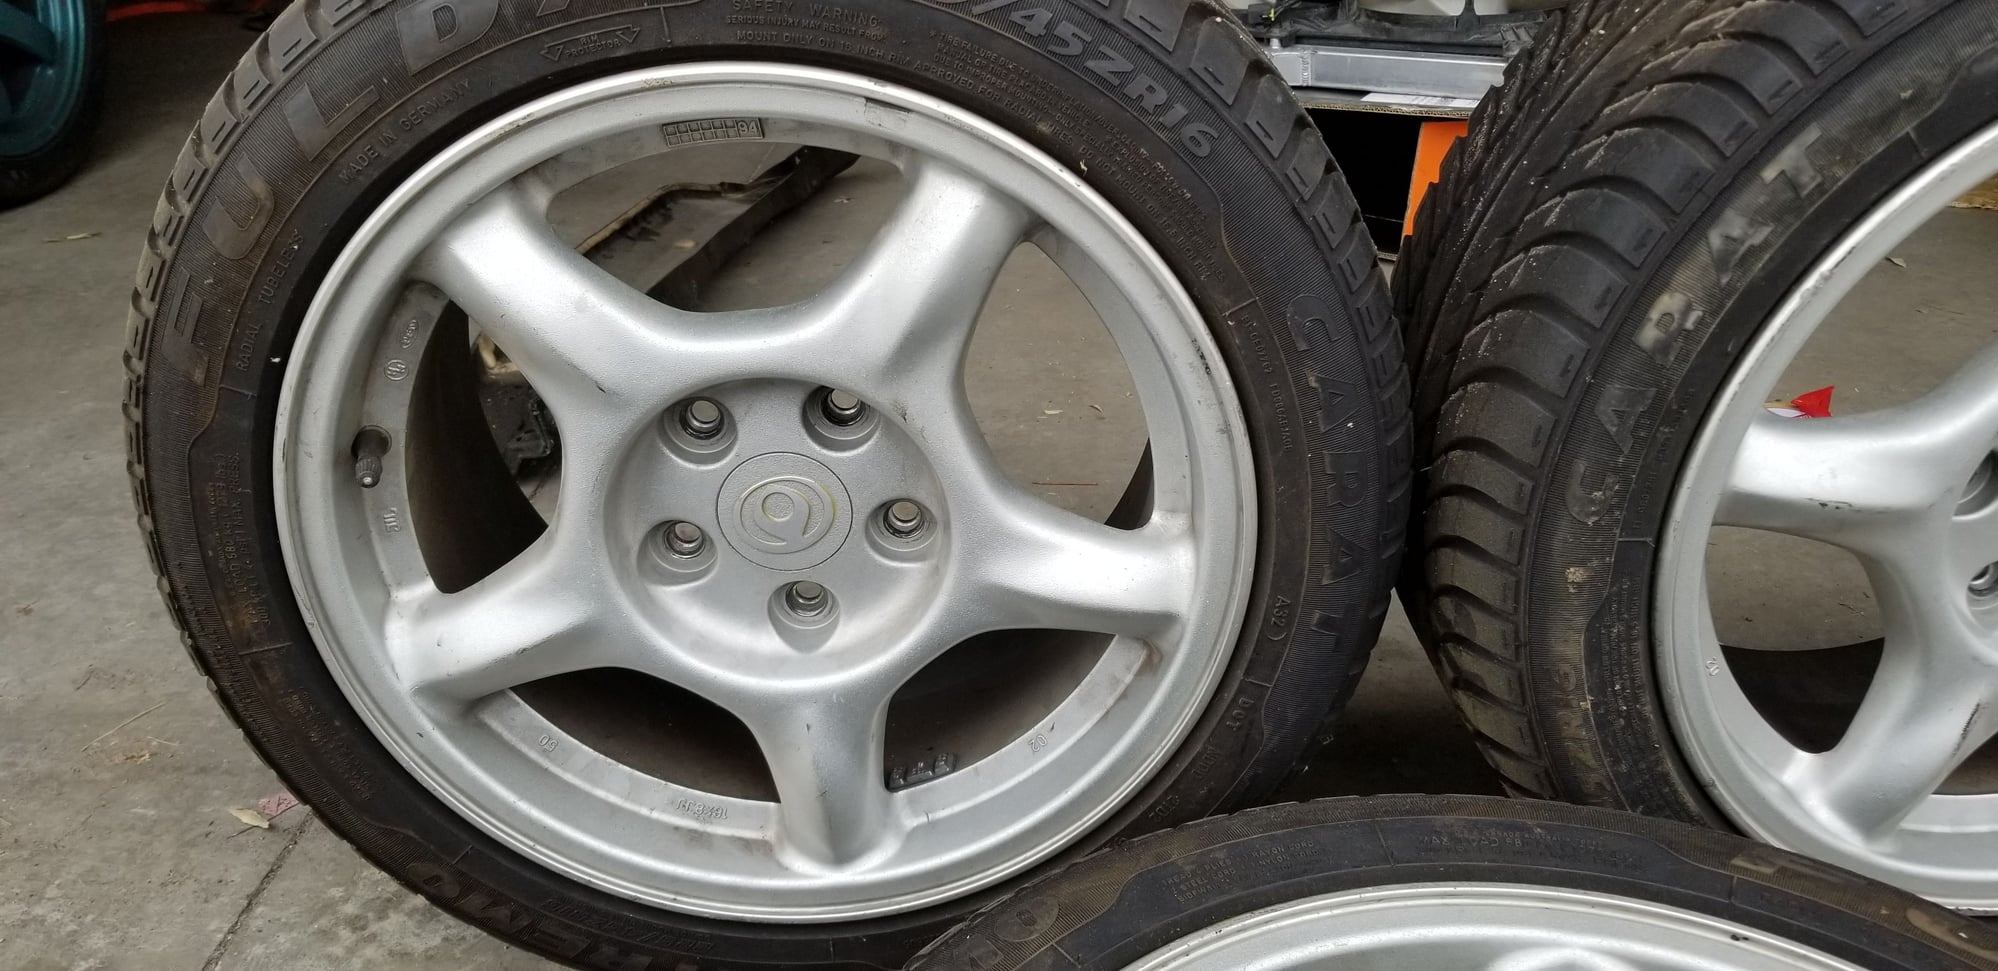 Wheels and Tires/Axles - FD OEM Wheels - Used - 1993 to 1995 Mazda RX-7 - Denver, CO 80211, United States